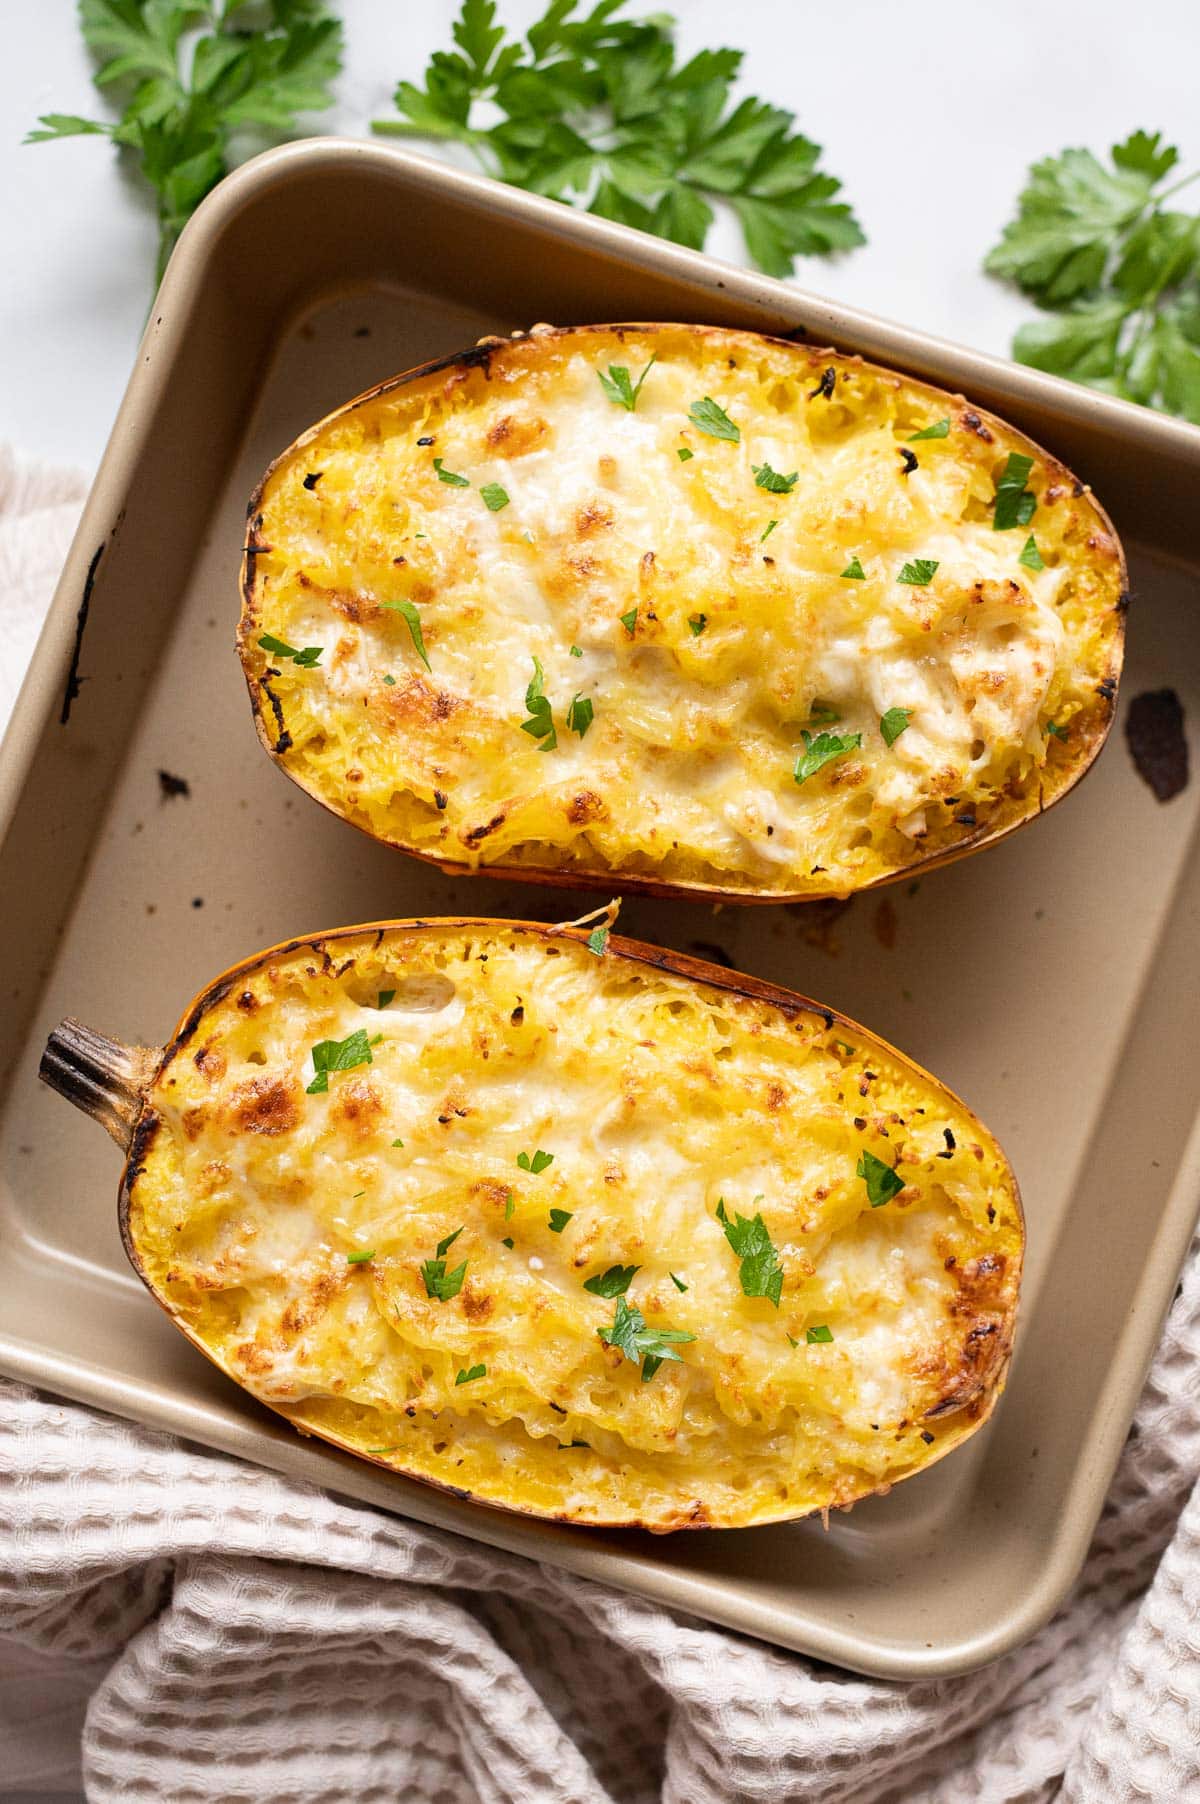 Chicken alfredo spaghetti squash boats garnished with parsley on a baking sheet. Linen towel and parsley around it on a counter.